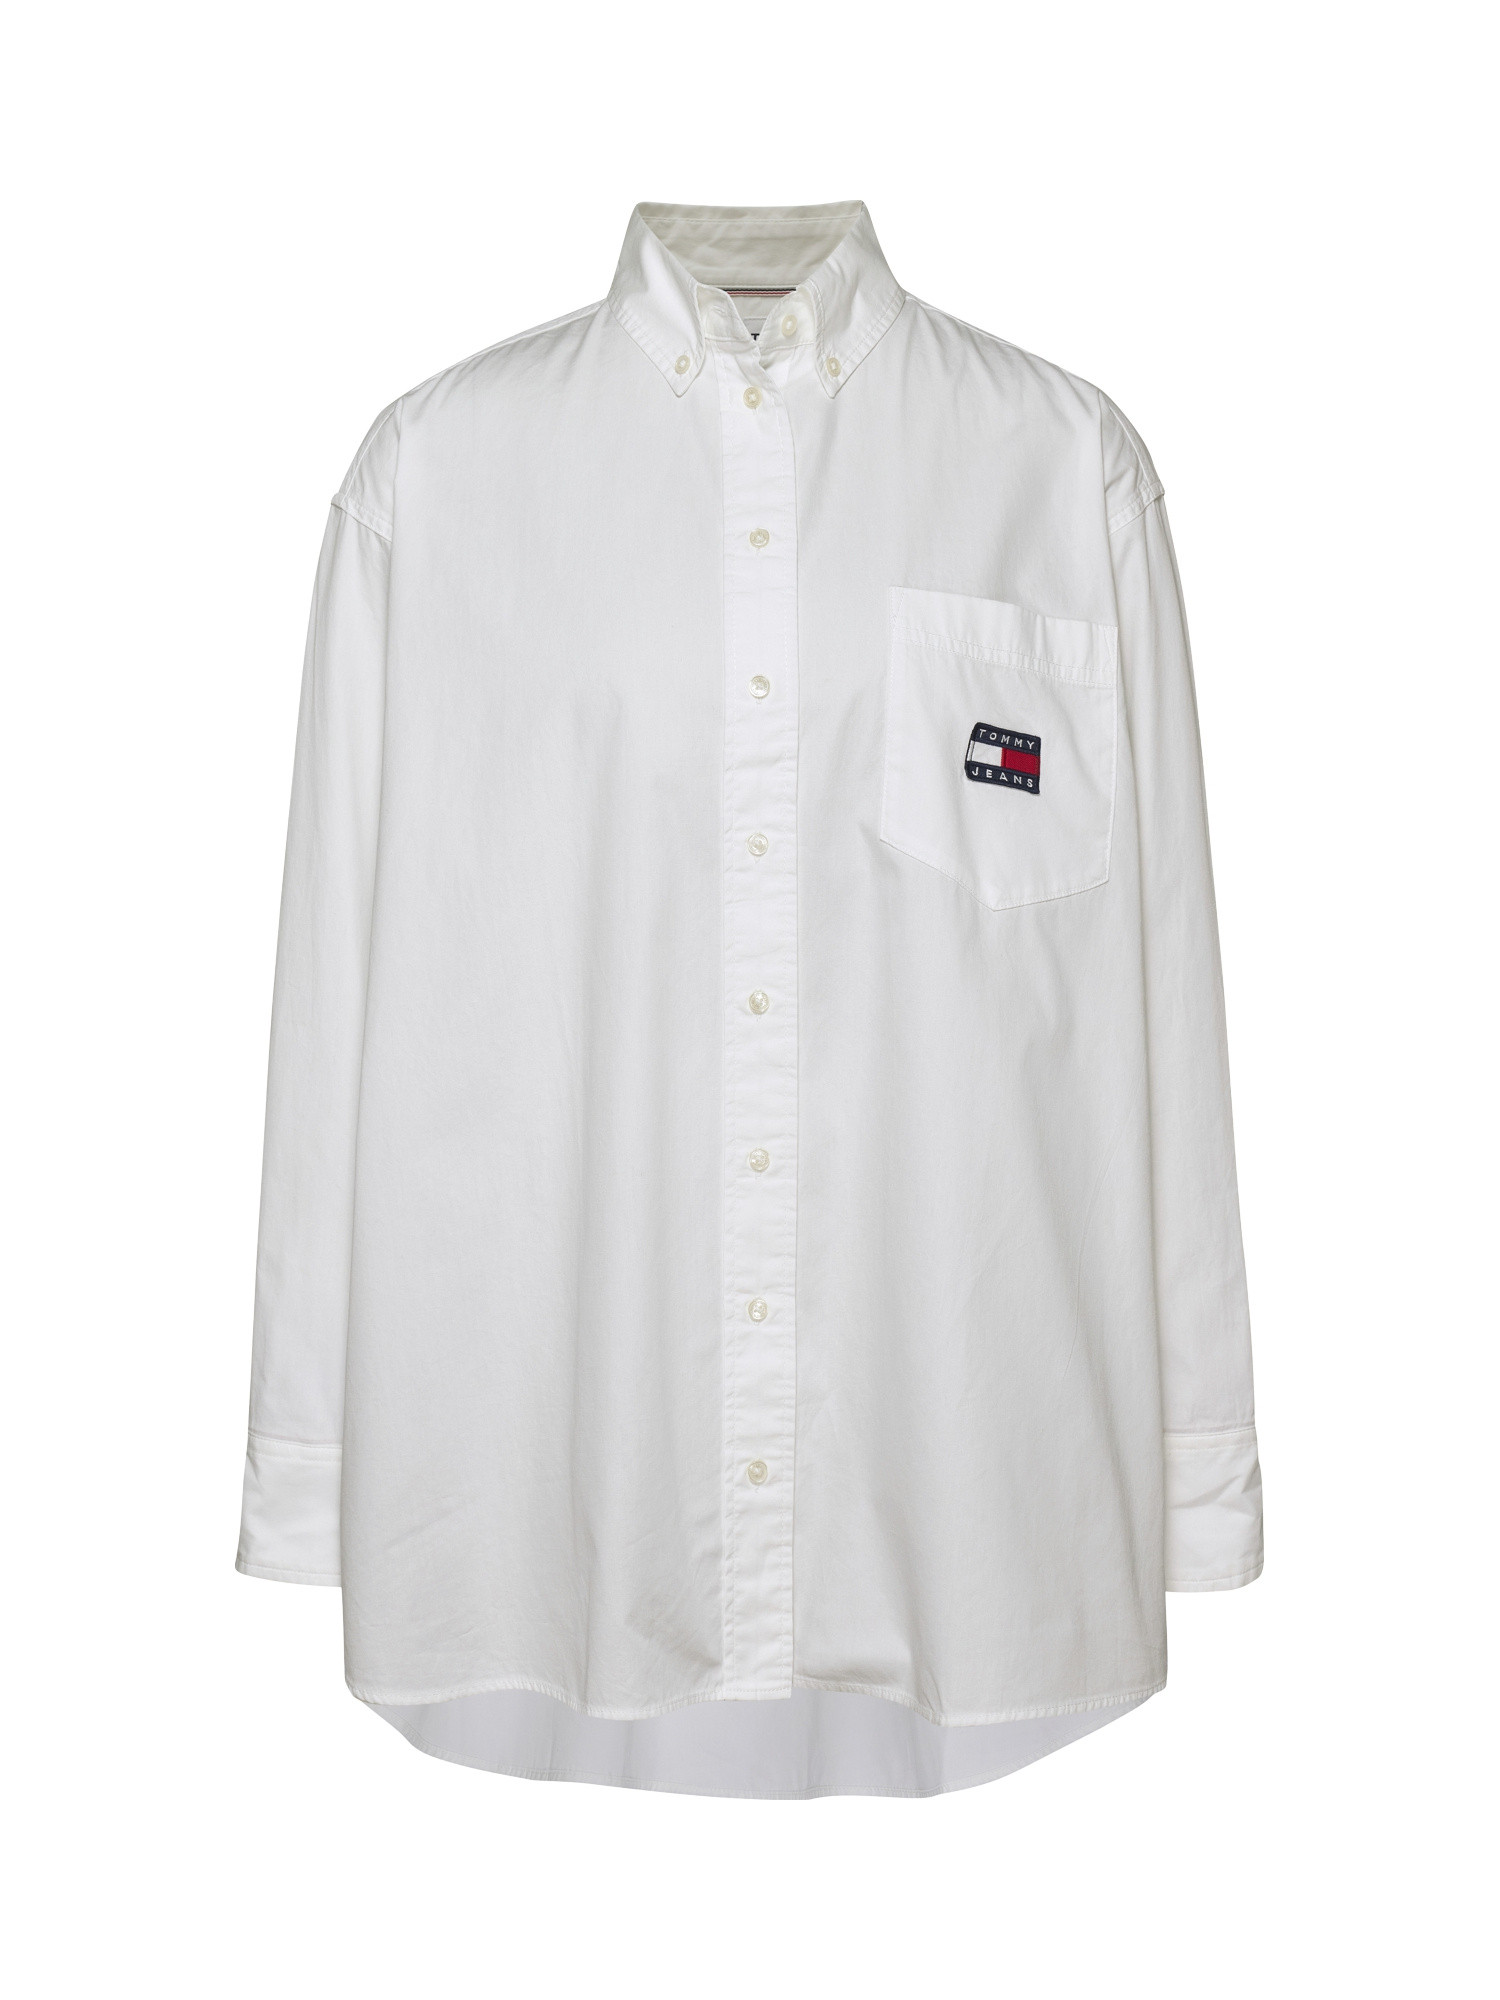 Tommy Jeans - Camicia oversize con logo in cotone, White, large image number 0